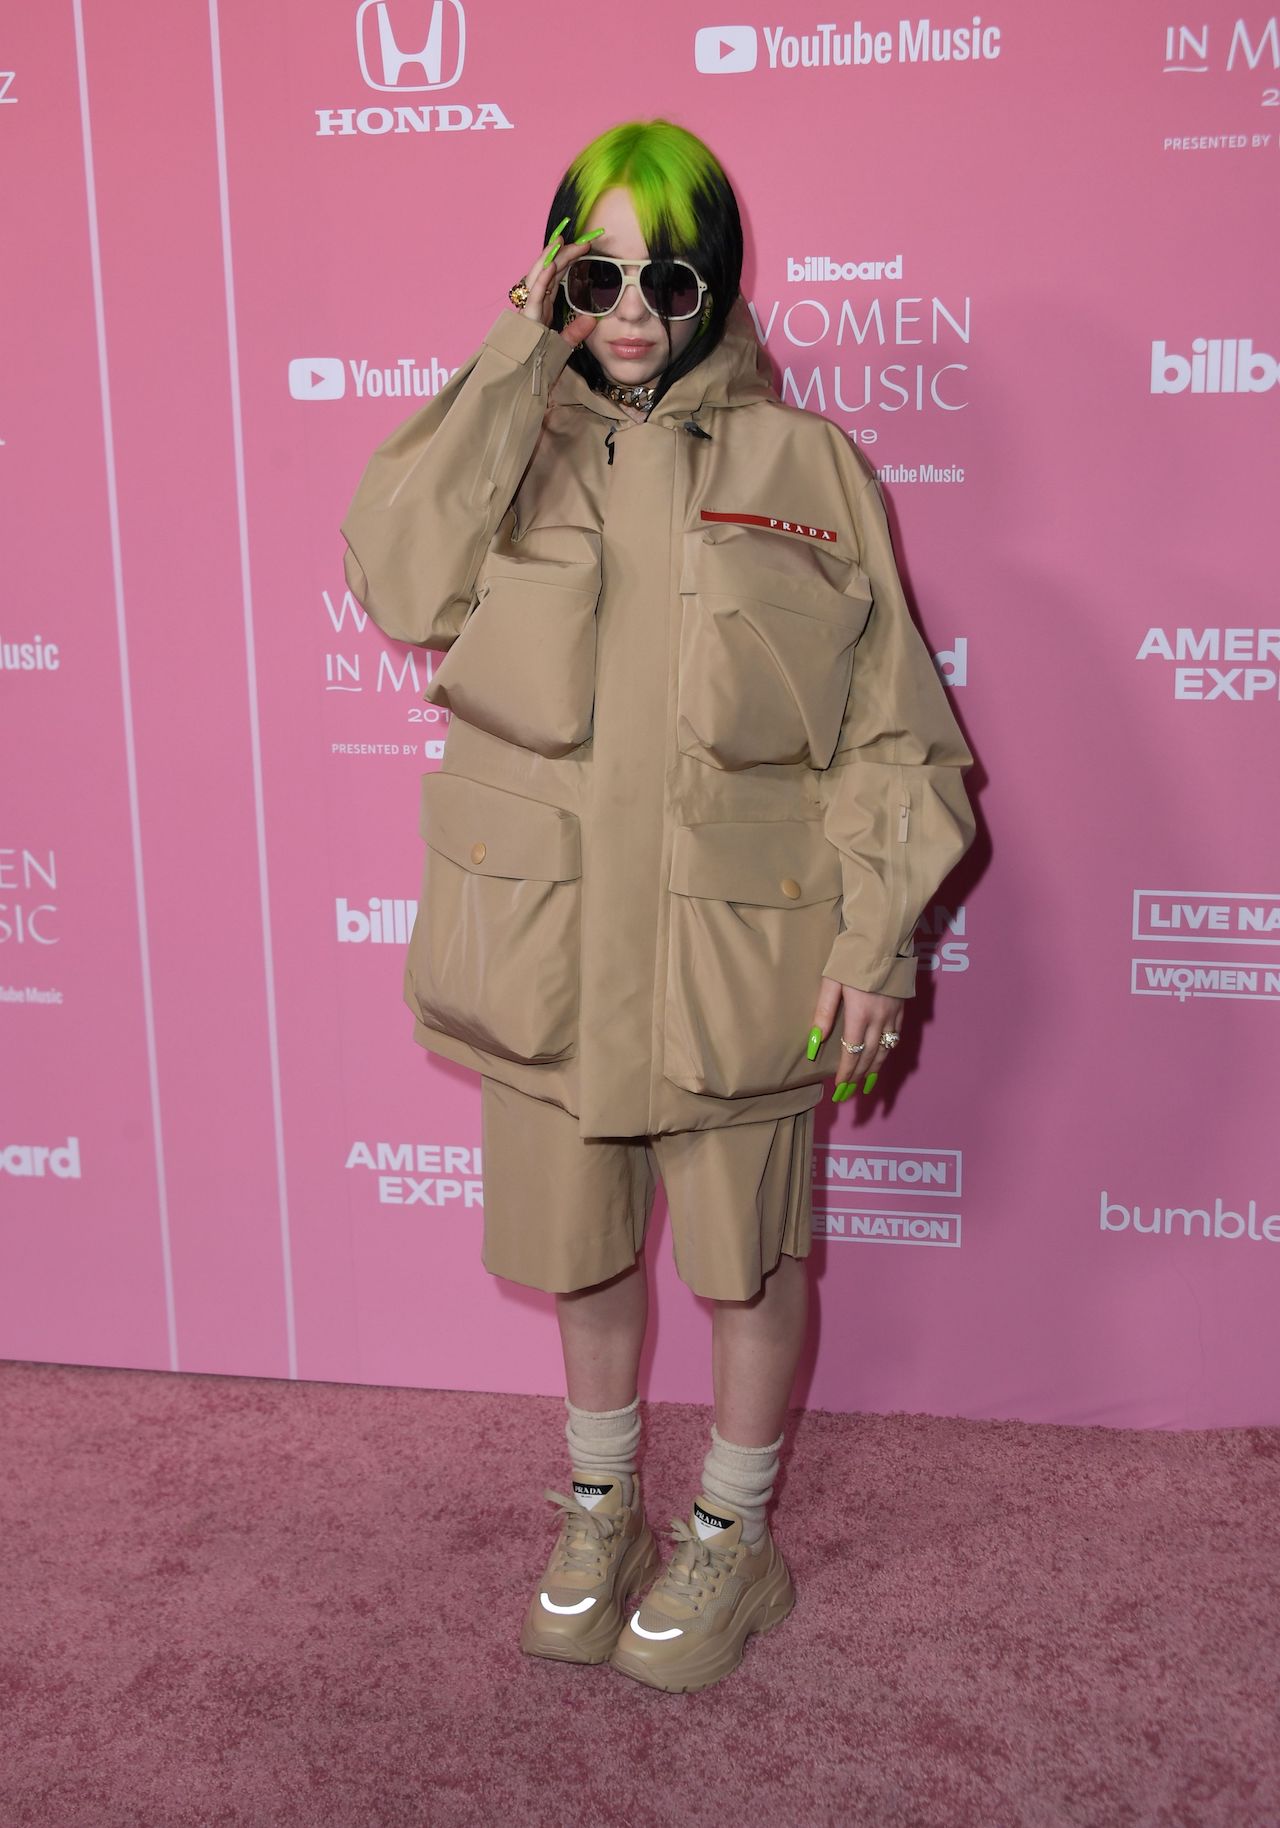 American singer/songwriter Billie Eilish arrives for Billboard's Woman of the Year 2019 at the Hollywood Palladium in Los Angeles on December 12, 2019.  - Billboard's Woman of the Year 2019 is Billie EIlish.